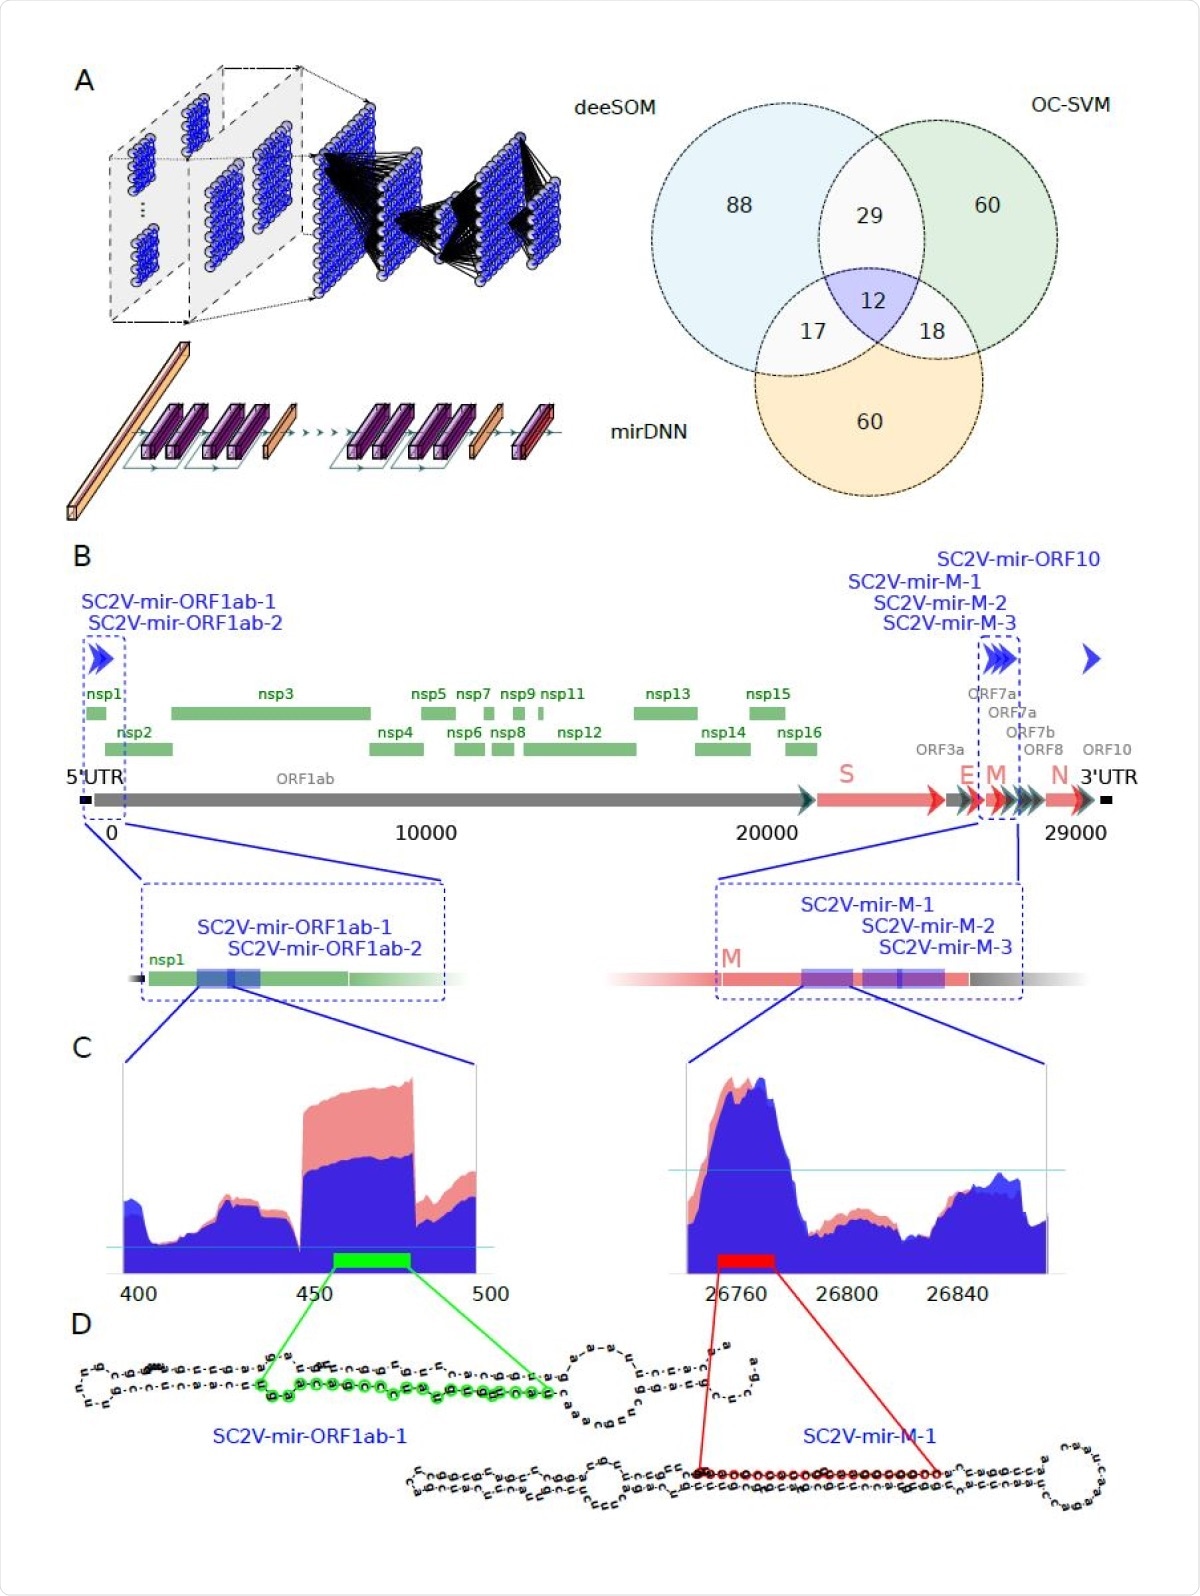 Identification of potential miRNA from six precursors hidden in the protein-coding genome of SARS-CoV-2. A) Venn diagram showing the number of candidate sequences to pre-miRNAs in the SARSCoV- 2 virus found by three machine learning methods: deeSOM (blue), mirDNN (orange) and OC-SVM (green). Deep models are schematically represented. On top is the deeSOM, several layers with ensembles of self-organizing maps, with elastic map size and automatic depth. On bottom is the mirDNN, a novel convolutional neural network with several layers and identity blocks. B) Genome location of the six predicted pre-miRNAs in the SARS-CoV-2 virus. C) Two examples of the read profiles in small RNA-seq samples of Calu-3 cell cultures at 24 hours upon infection. The horizontal blue line indicates the average reads counts for the whole genome. D) Predicted hairpin structures of the two SARS-CoV-2 pre-miRNAs shown in C).